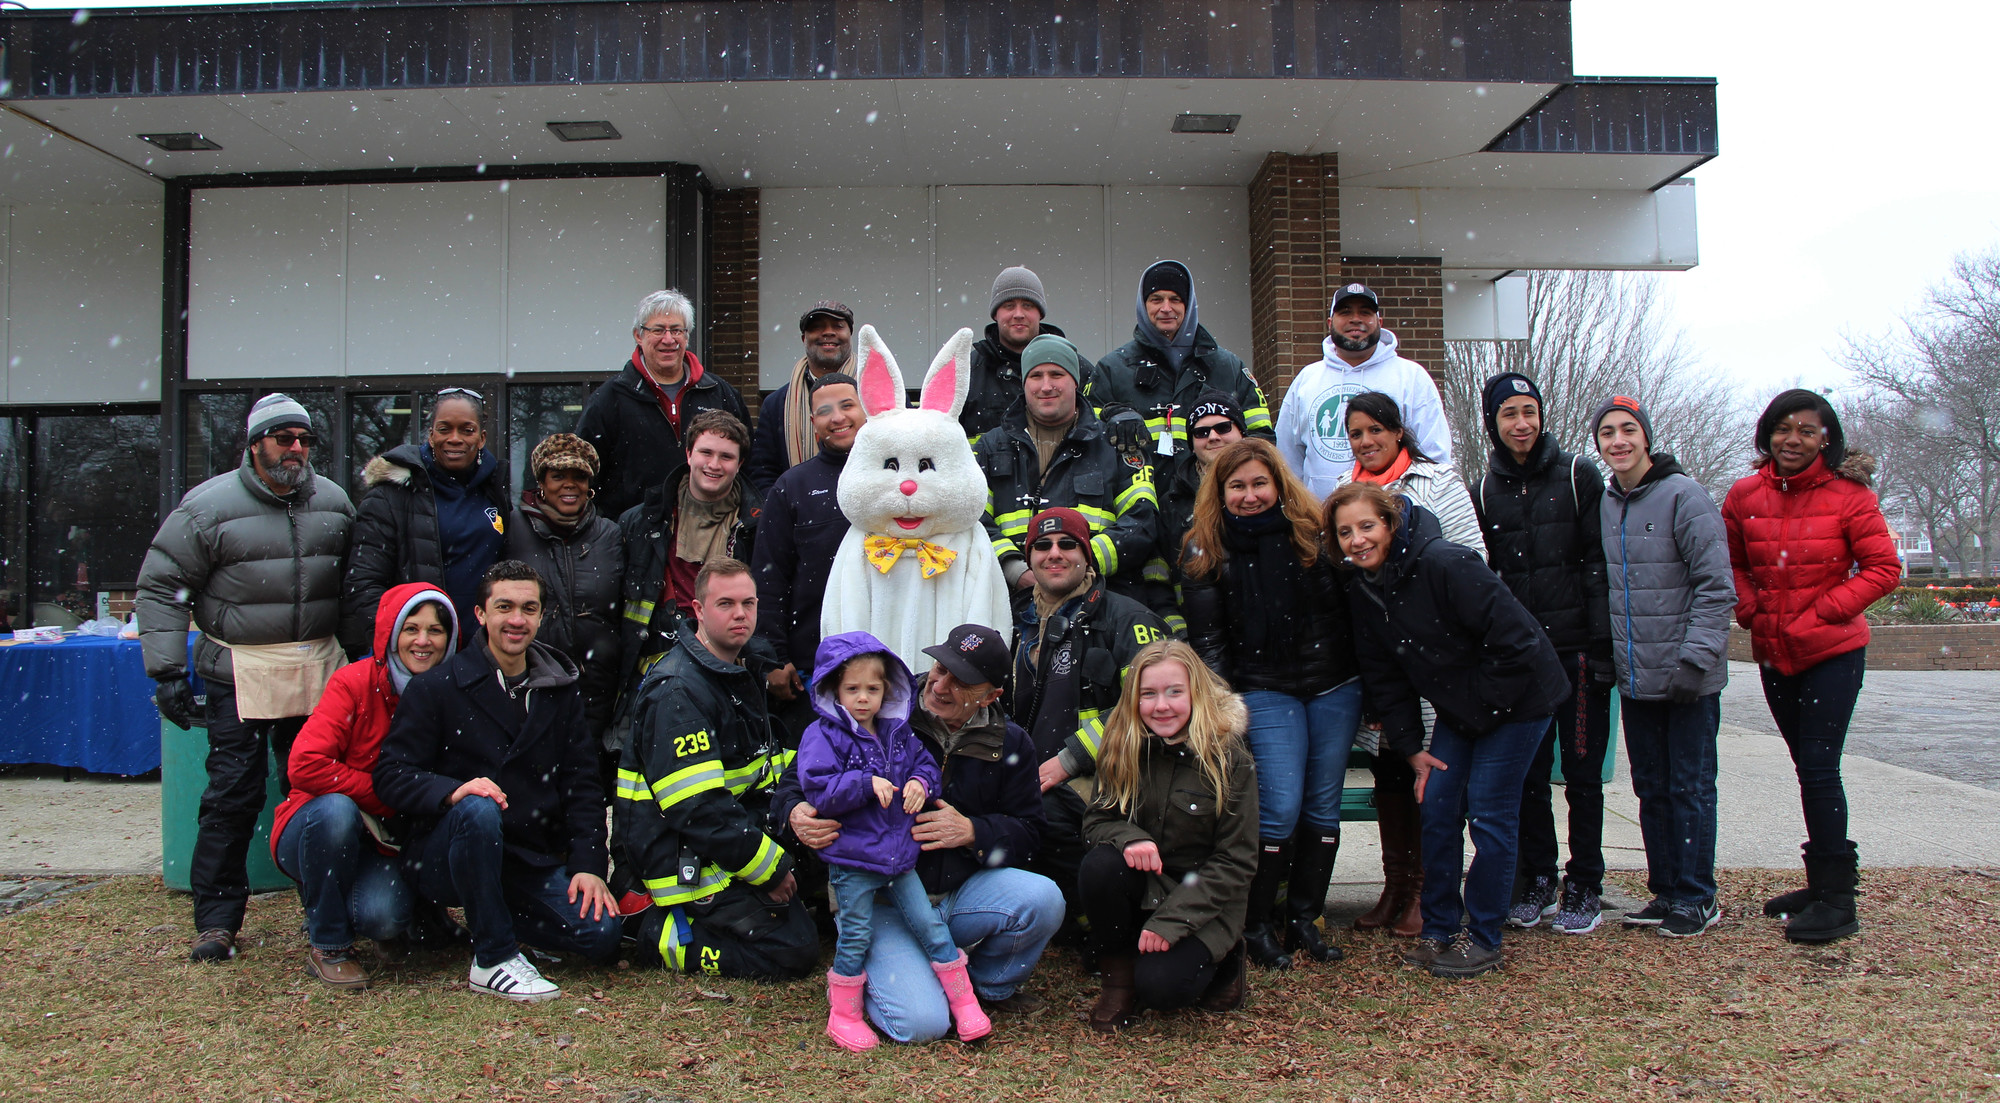 The Baldwin Community came together last Saturday for the Baldwin Civic Association’s third annual Eggstravaganza.